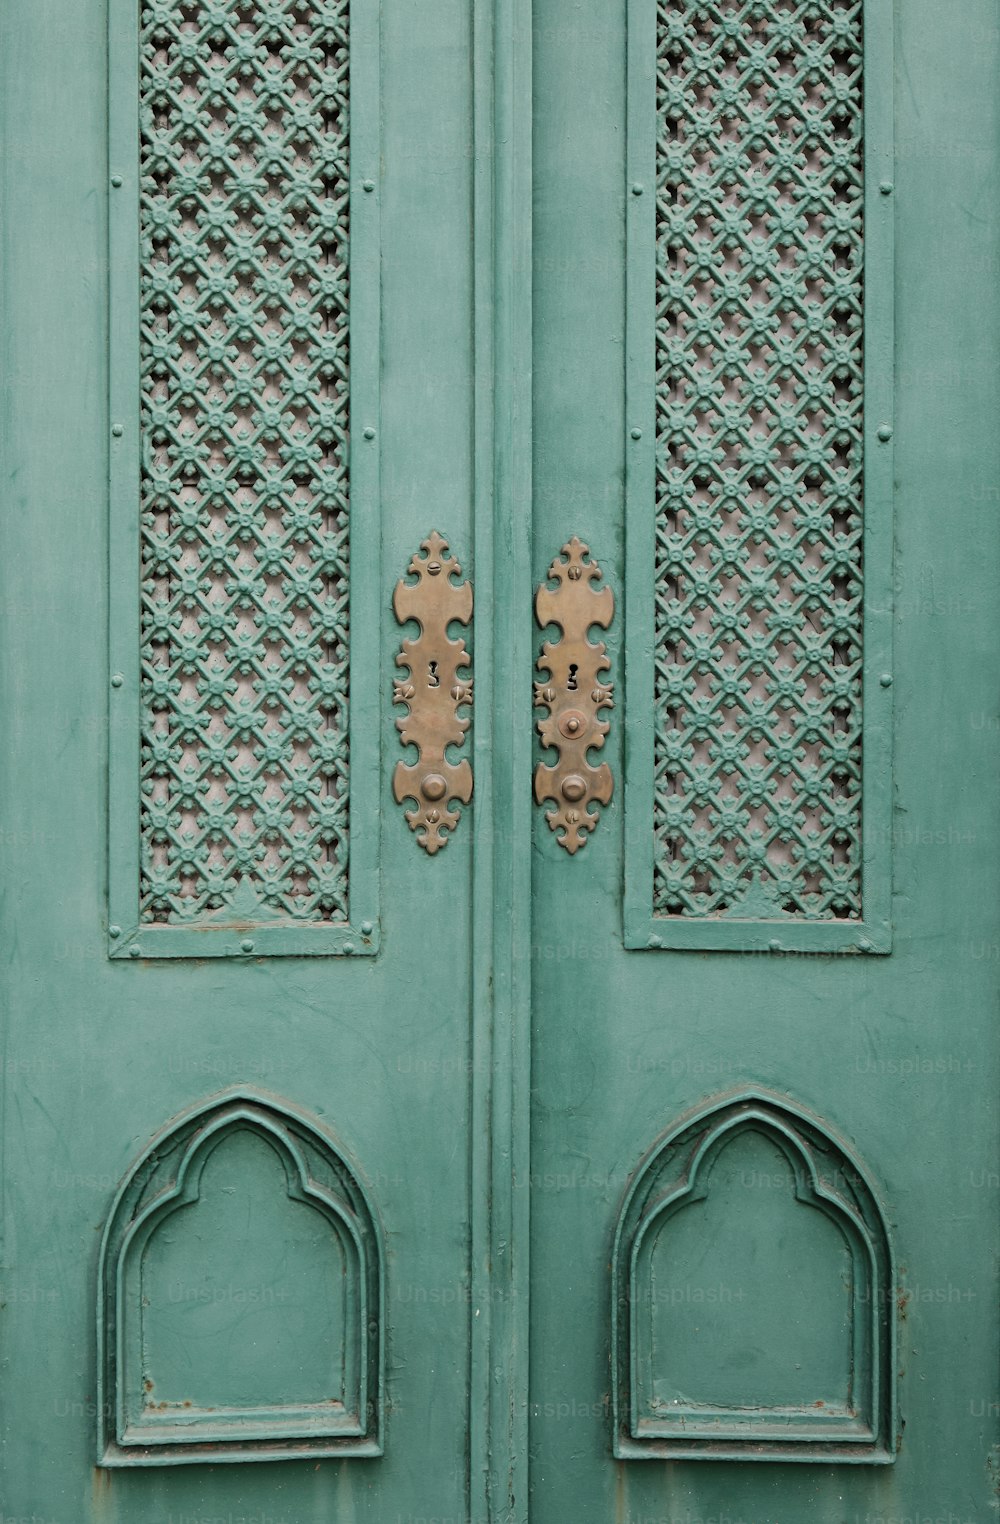 a close up of a green door with ornate designs